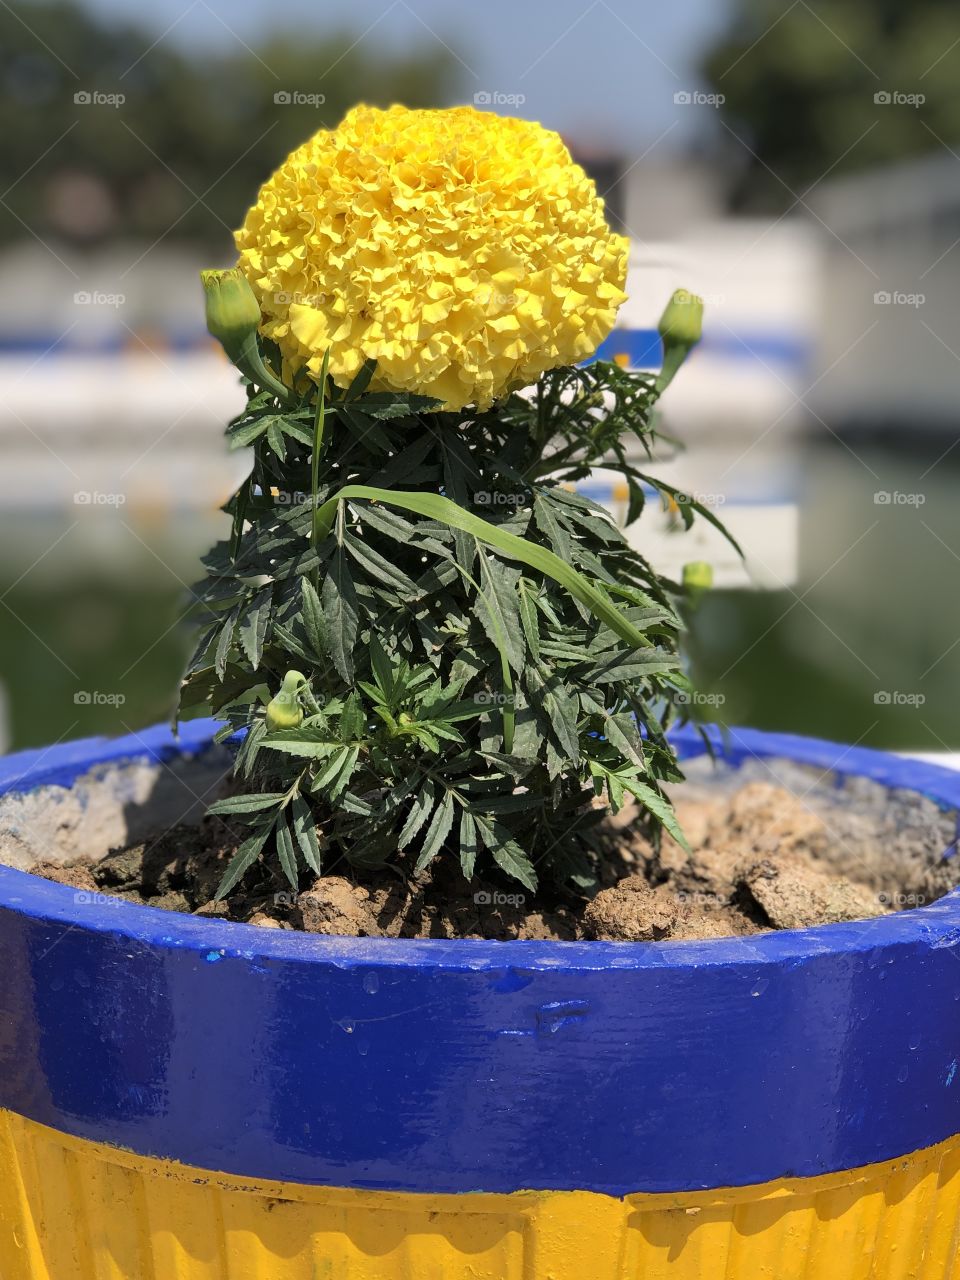 Marigold grown in a pot side view